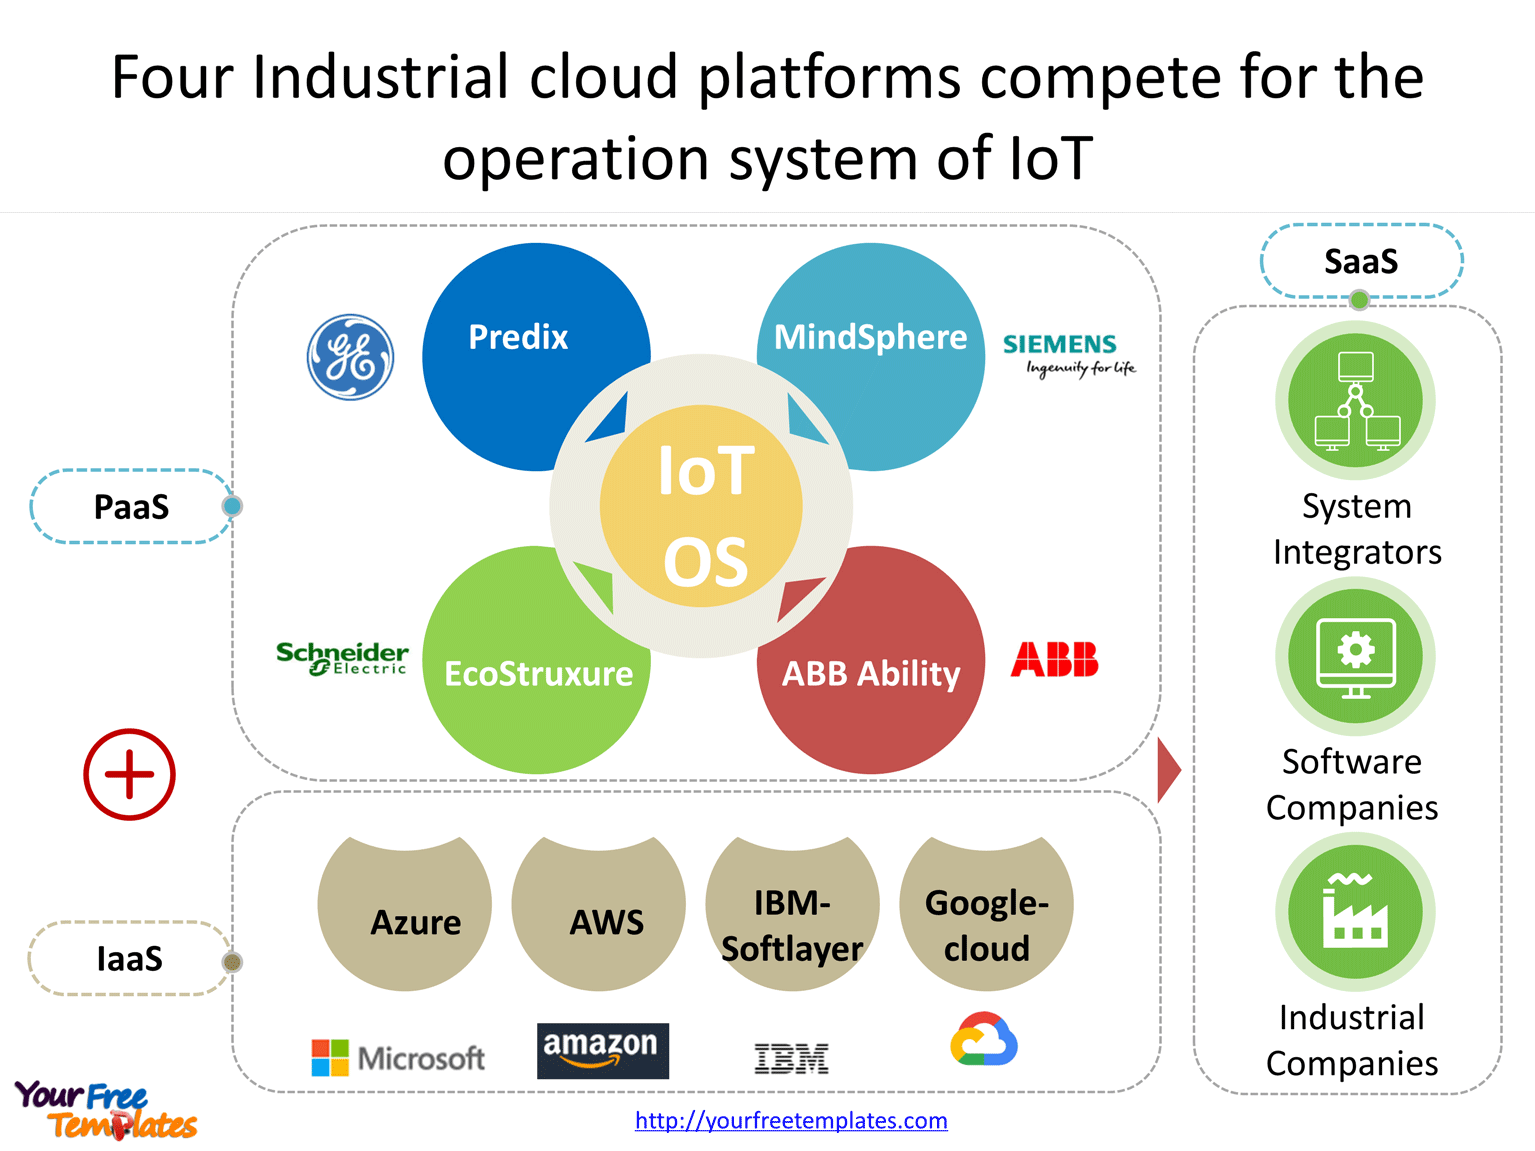 Four Industrial cloud platforms compete for the operation system of IoT